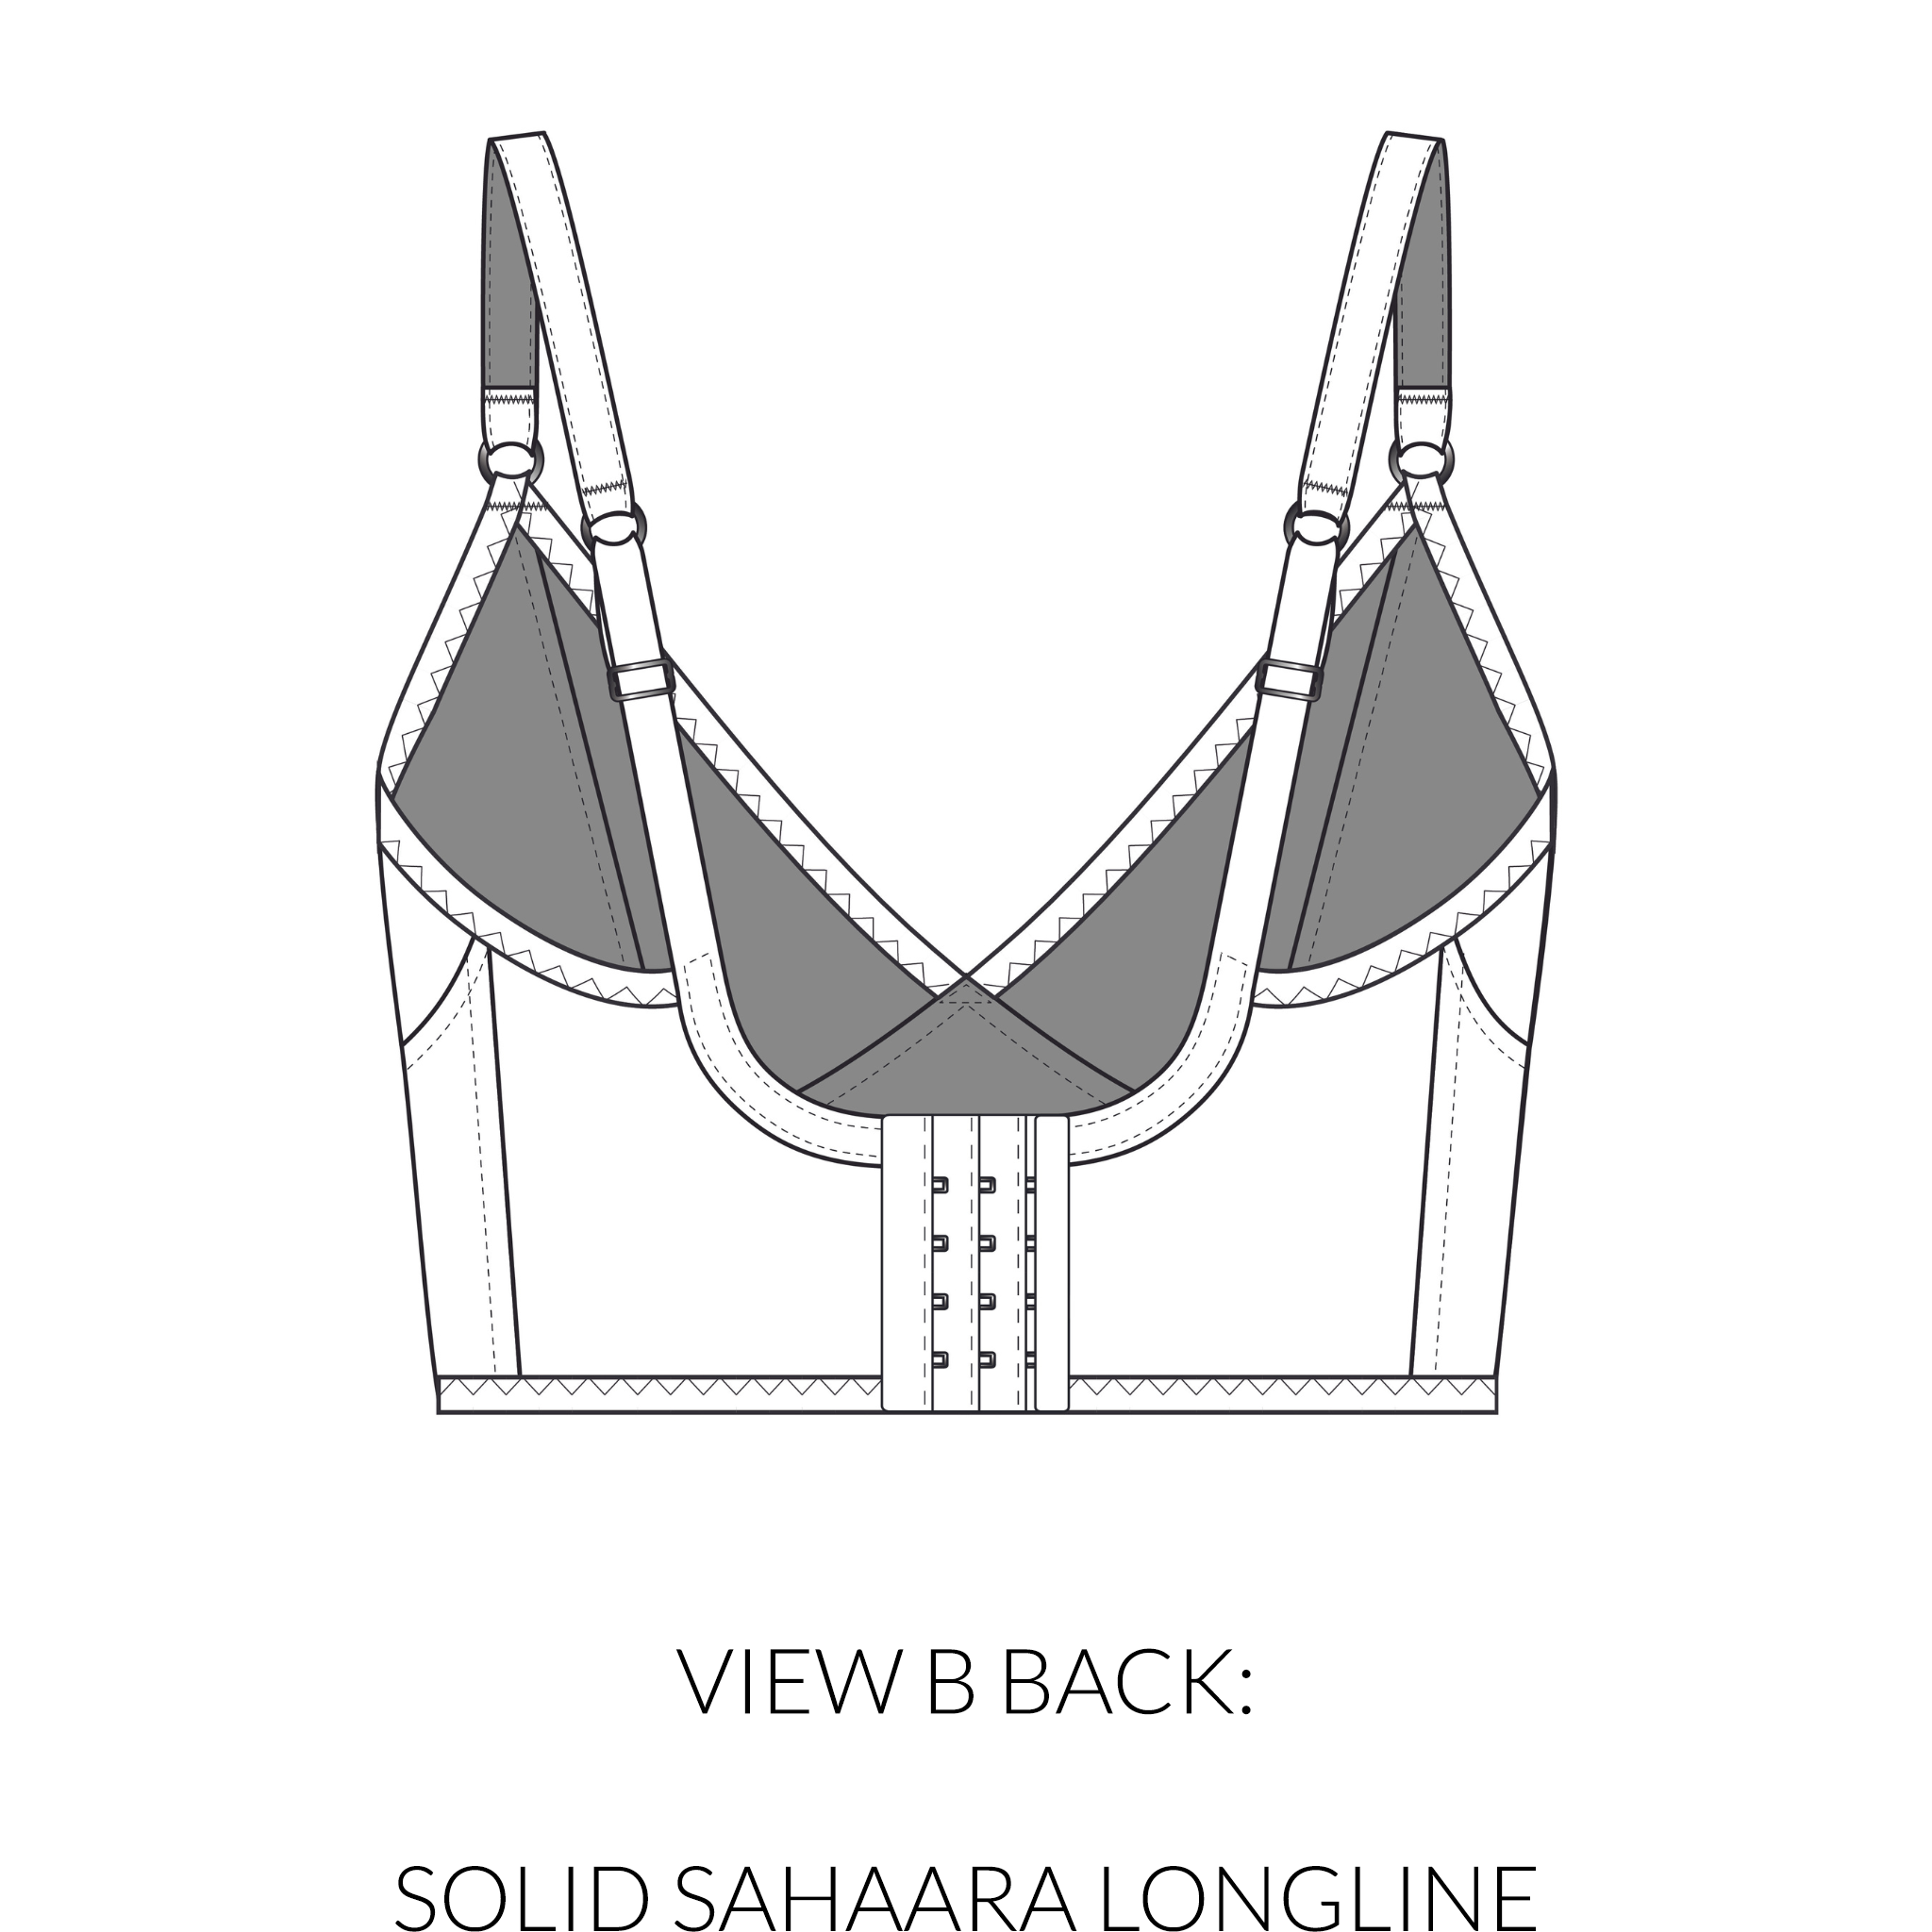 How To Make a SPORTS BRA  Patterns & Sewing Tutorial 